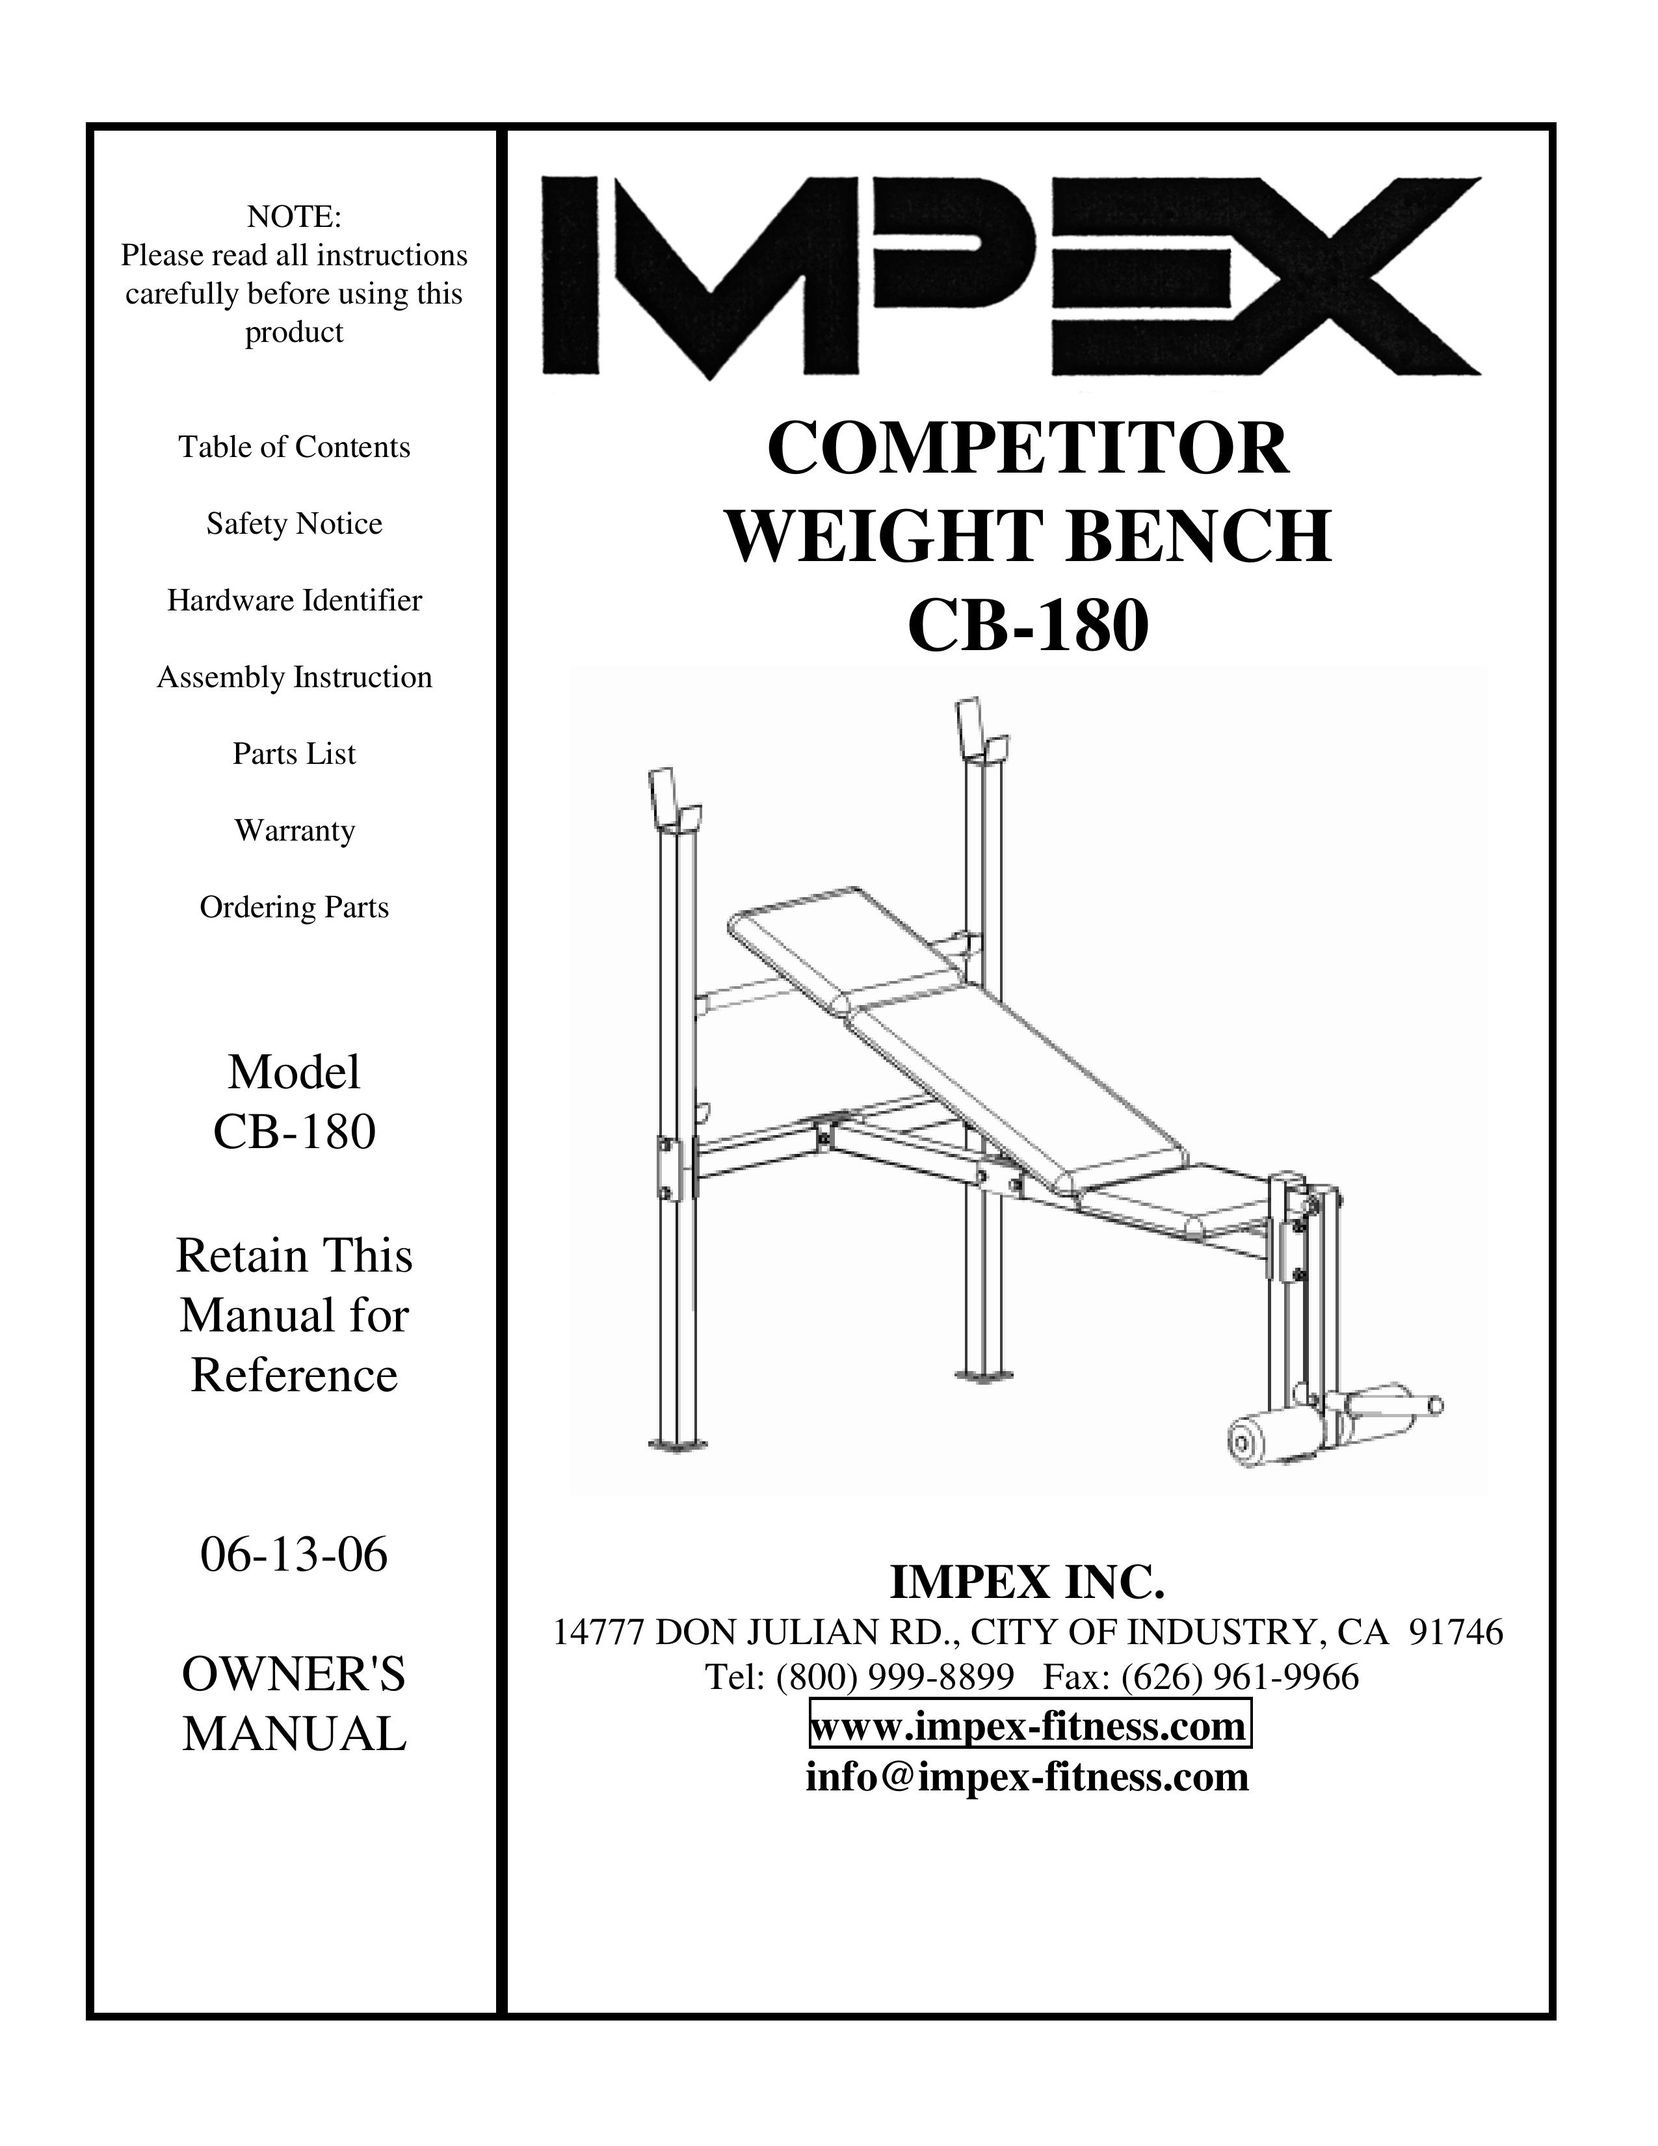 Impex CB-180 Home Gym User Manual